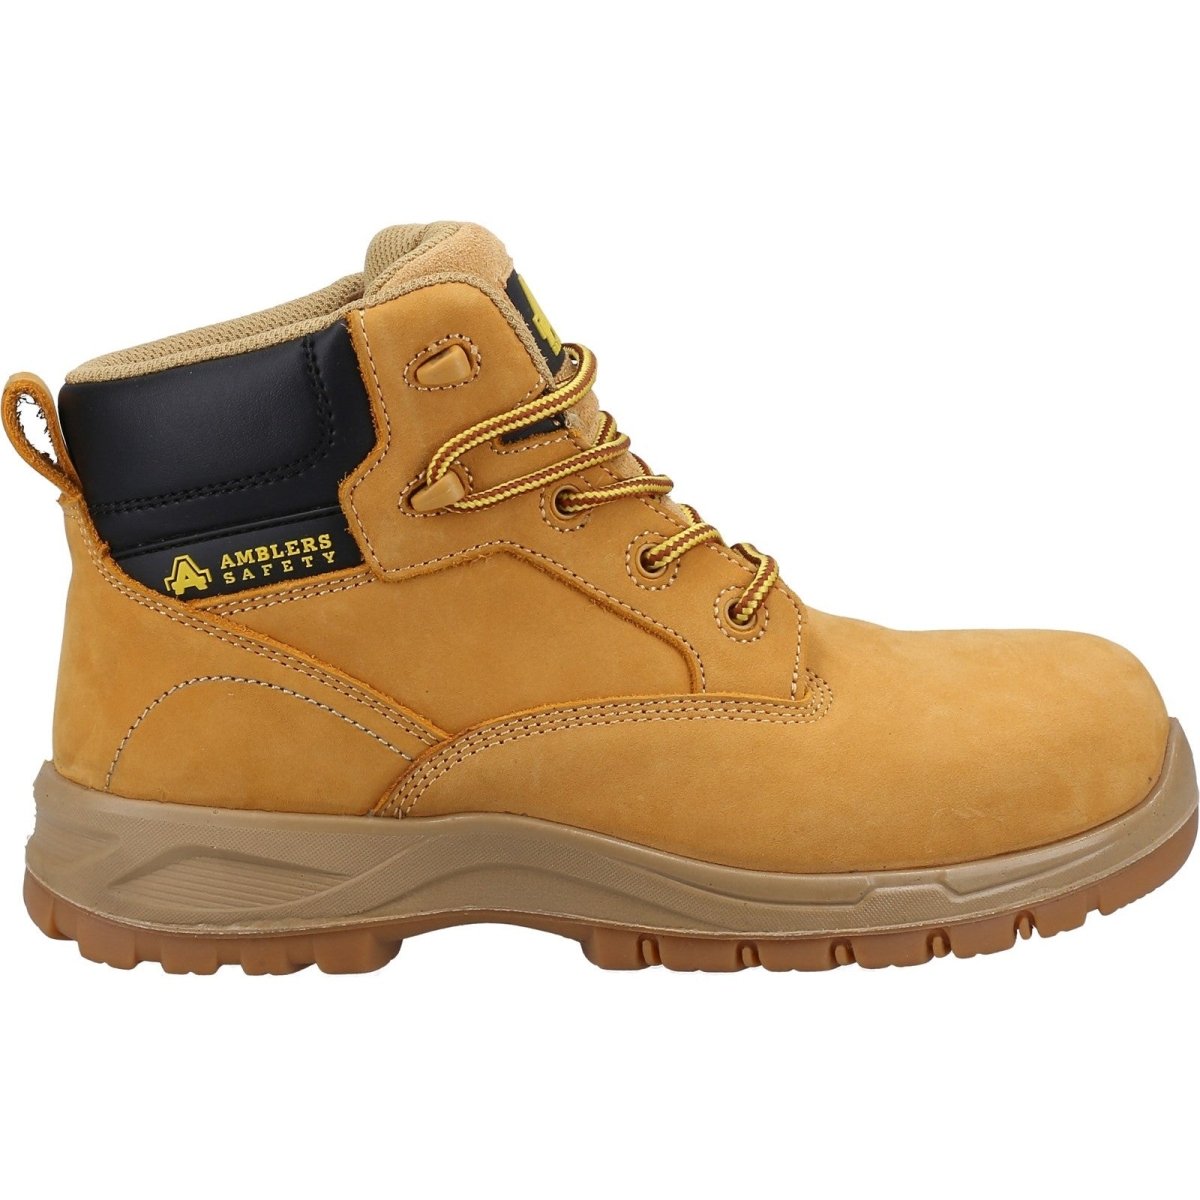 Amblers AS605C KIRA S3 Waterproof Safety Boots - Shoe Store Direct